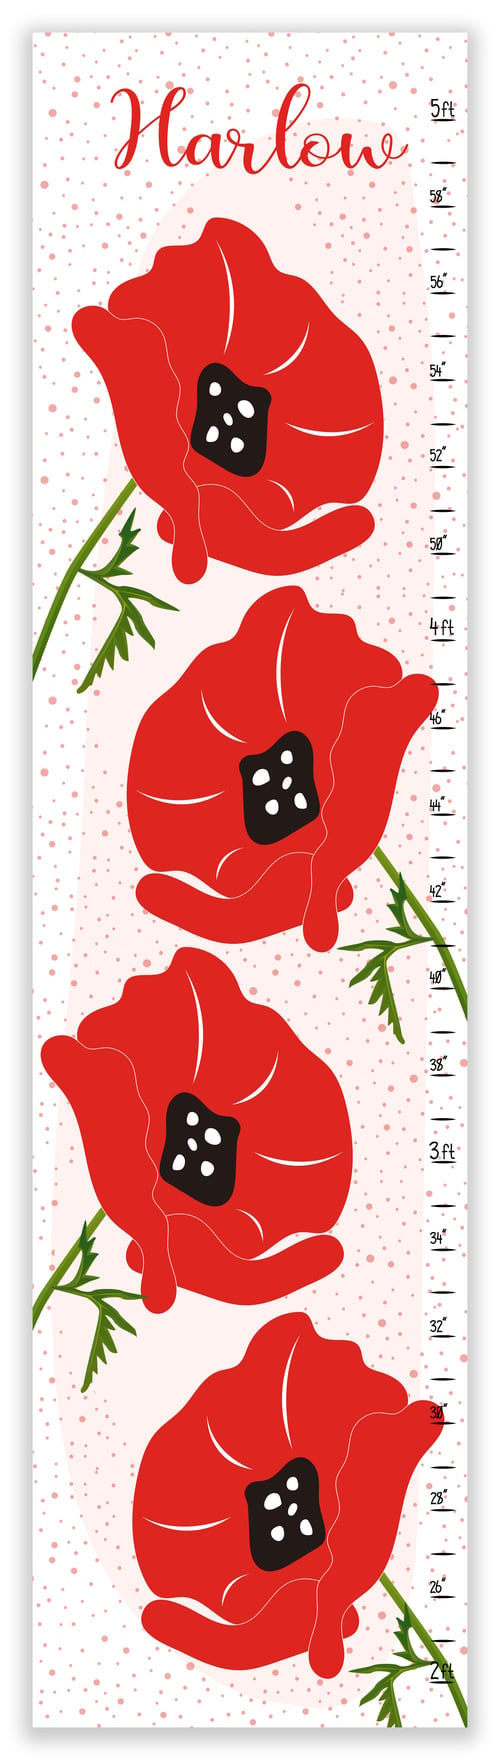 Image of Bright Red Poppies - Personalized Canvas Growth Chart